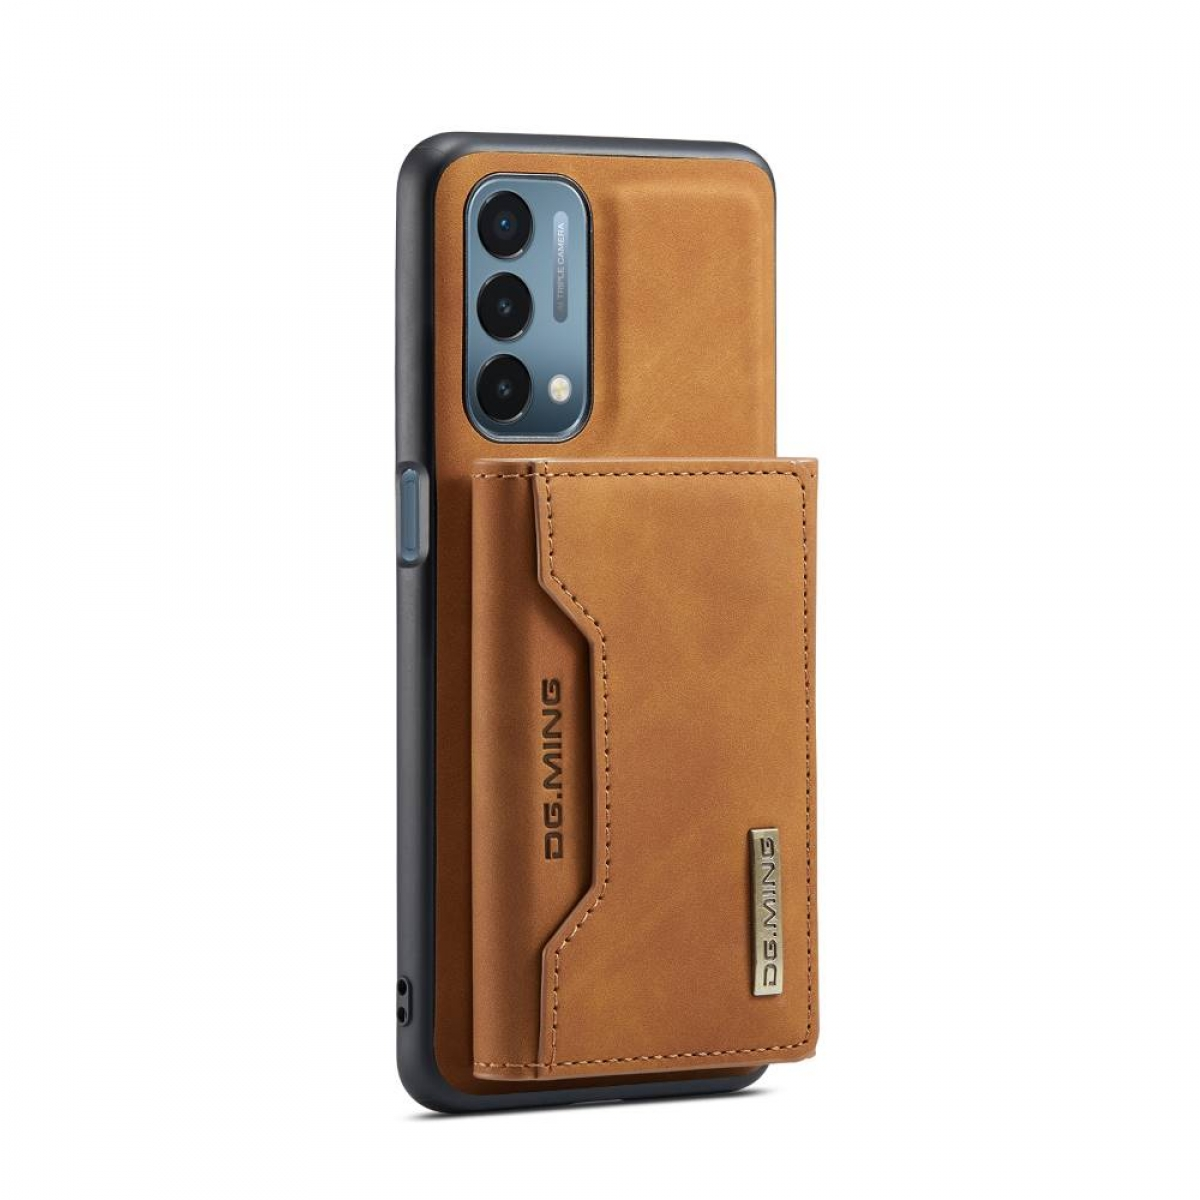 DG MING M2 2in1, Nord 5G, OnePlus, Braun N200 Backcover